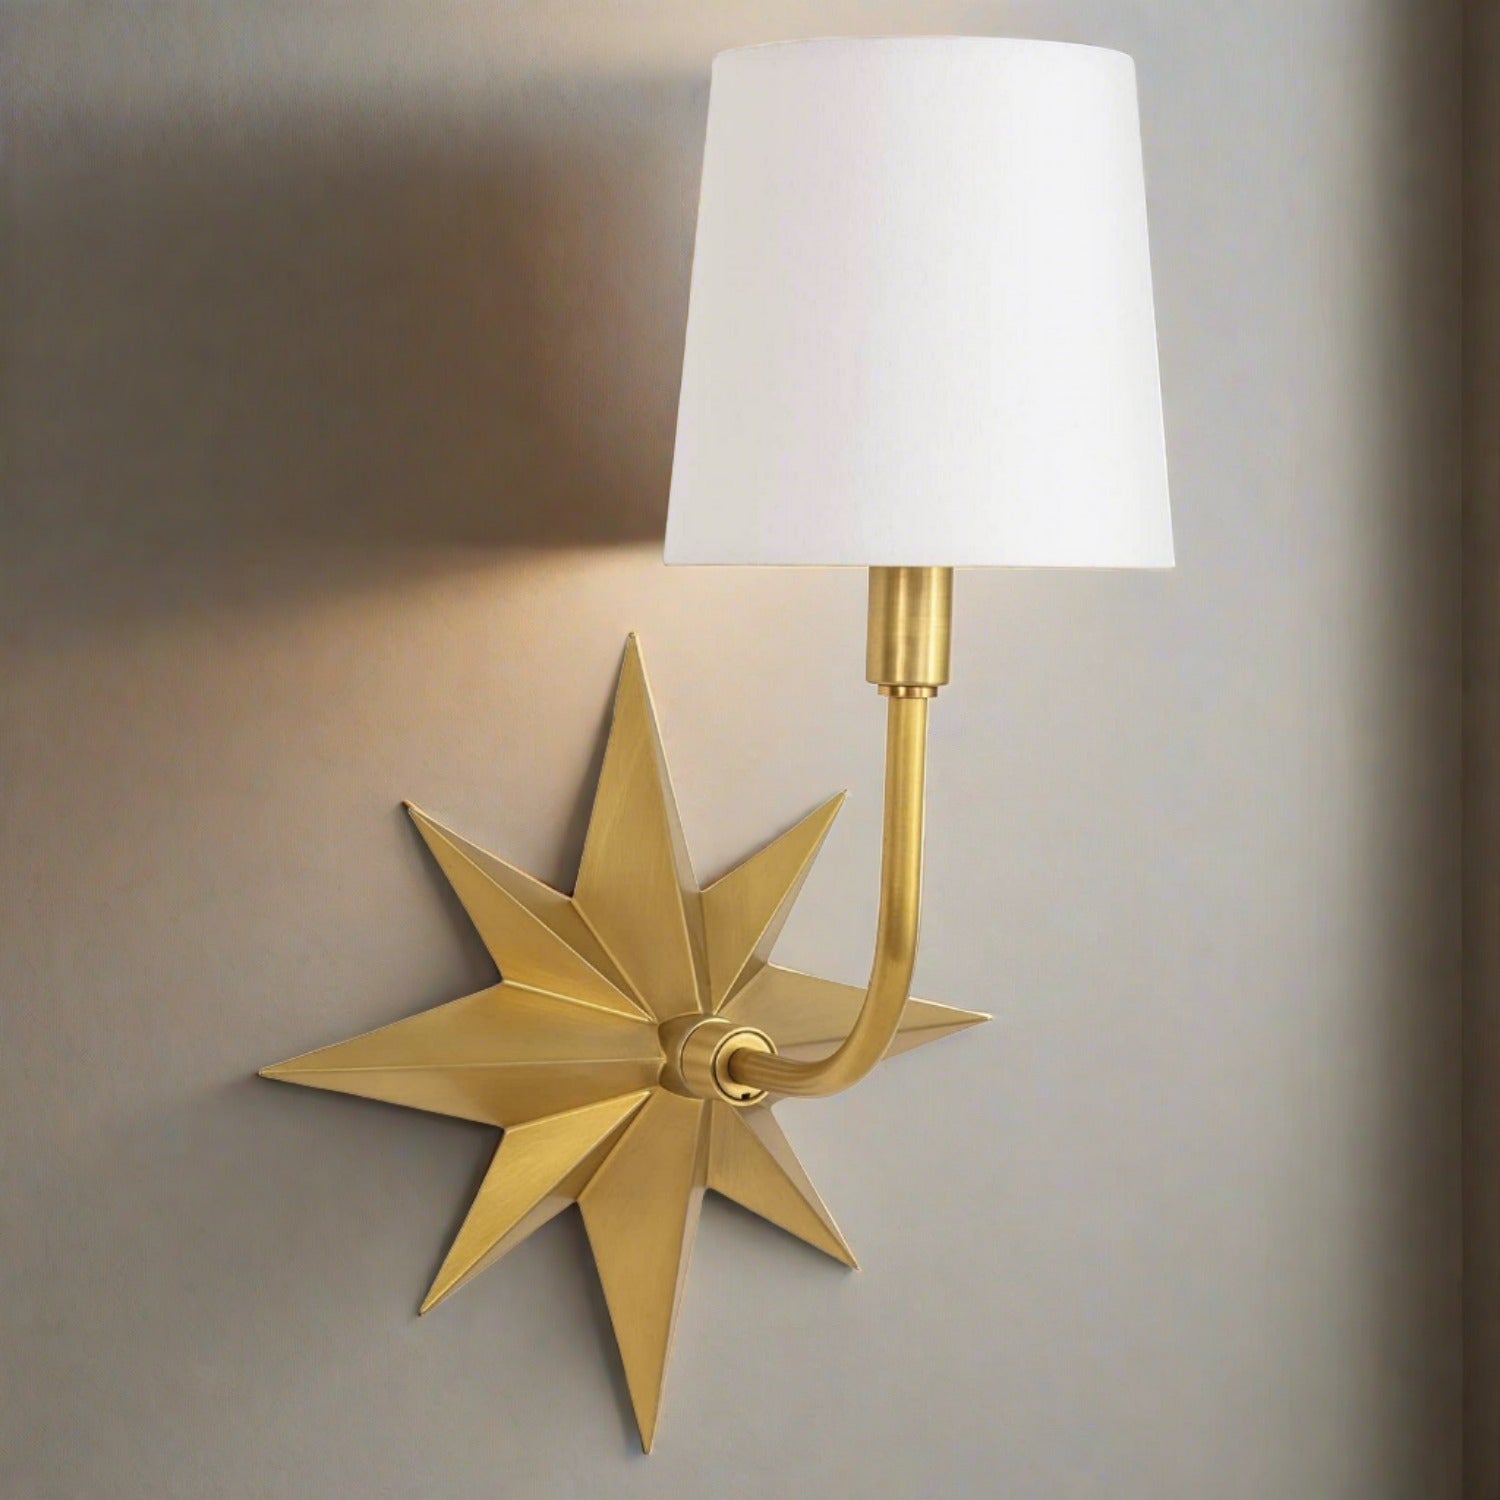 Etoile One Light Wall Sconce by Regina Andrew in Natural Brass Finish (15-1158NB)